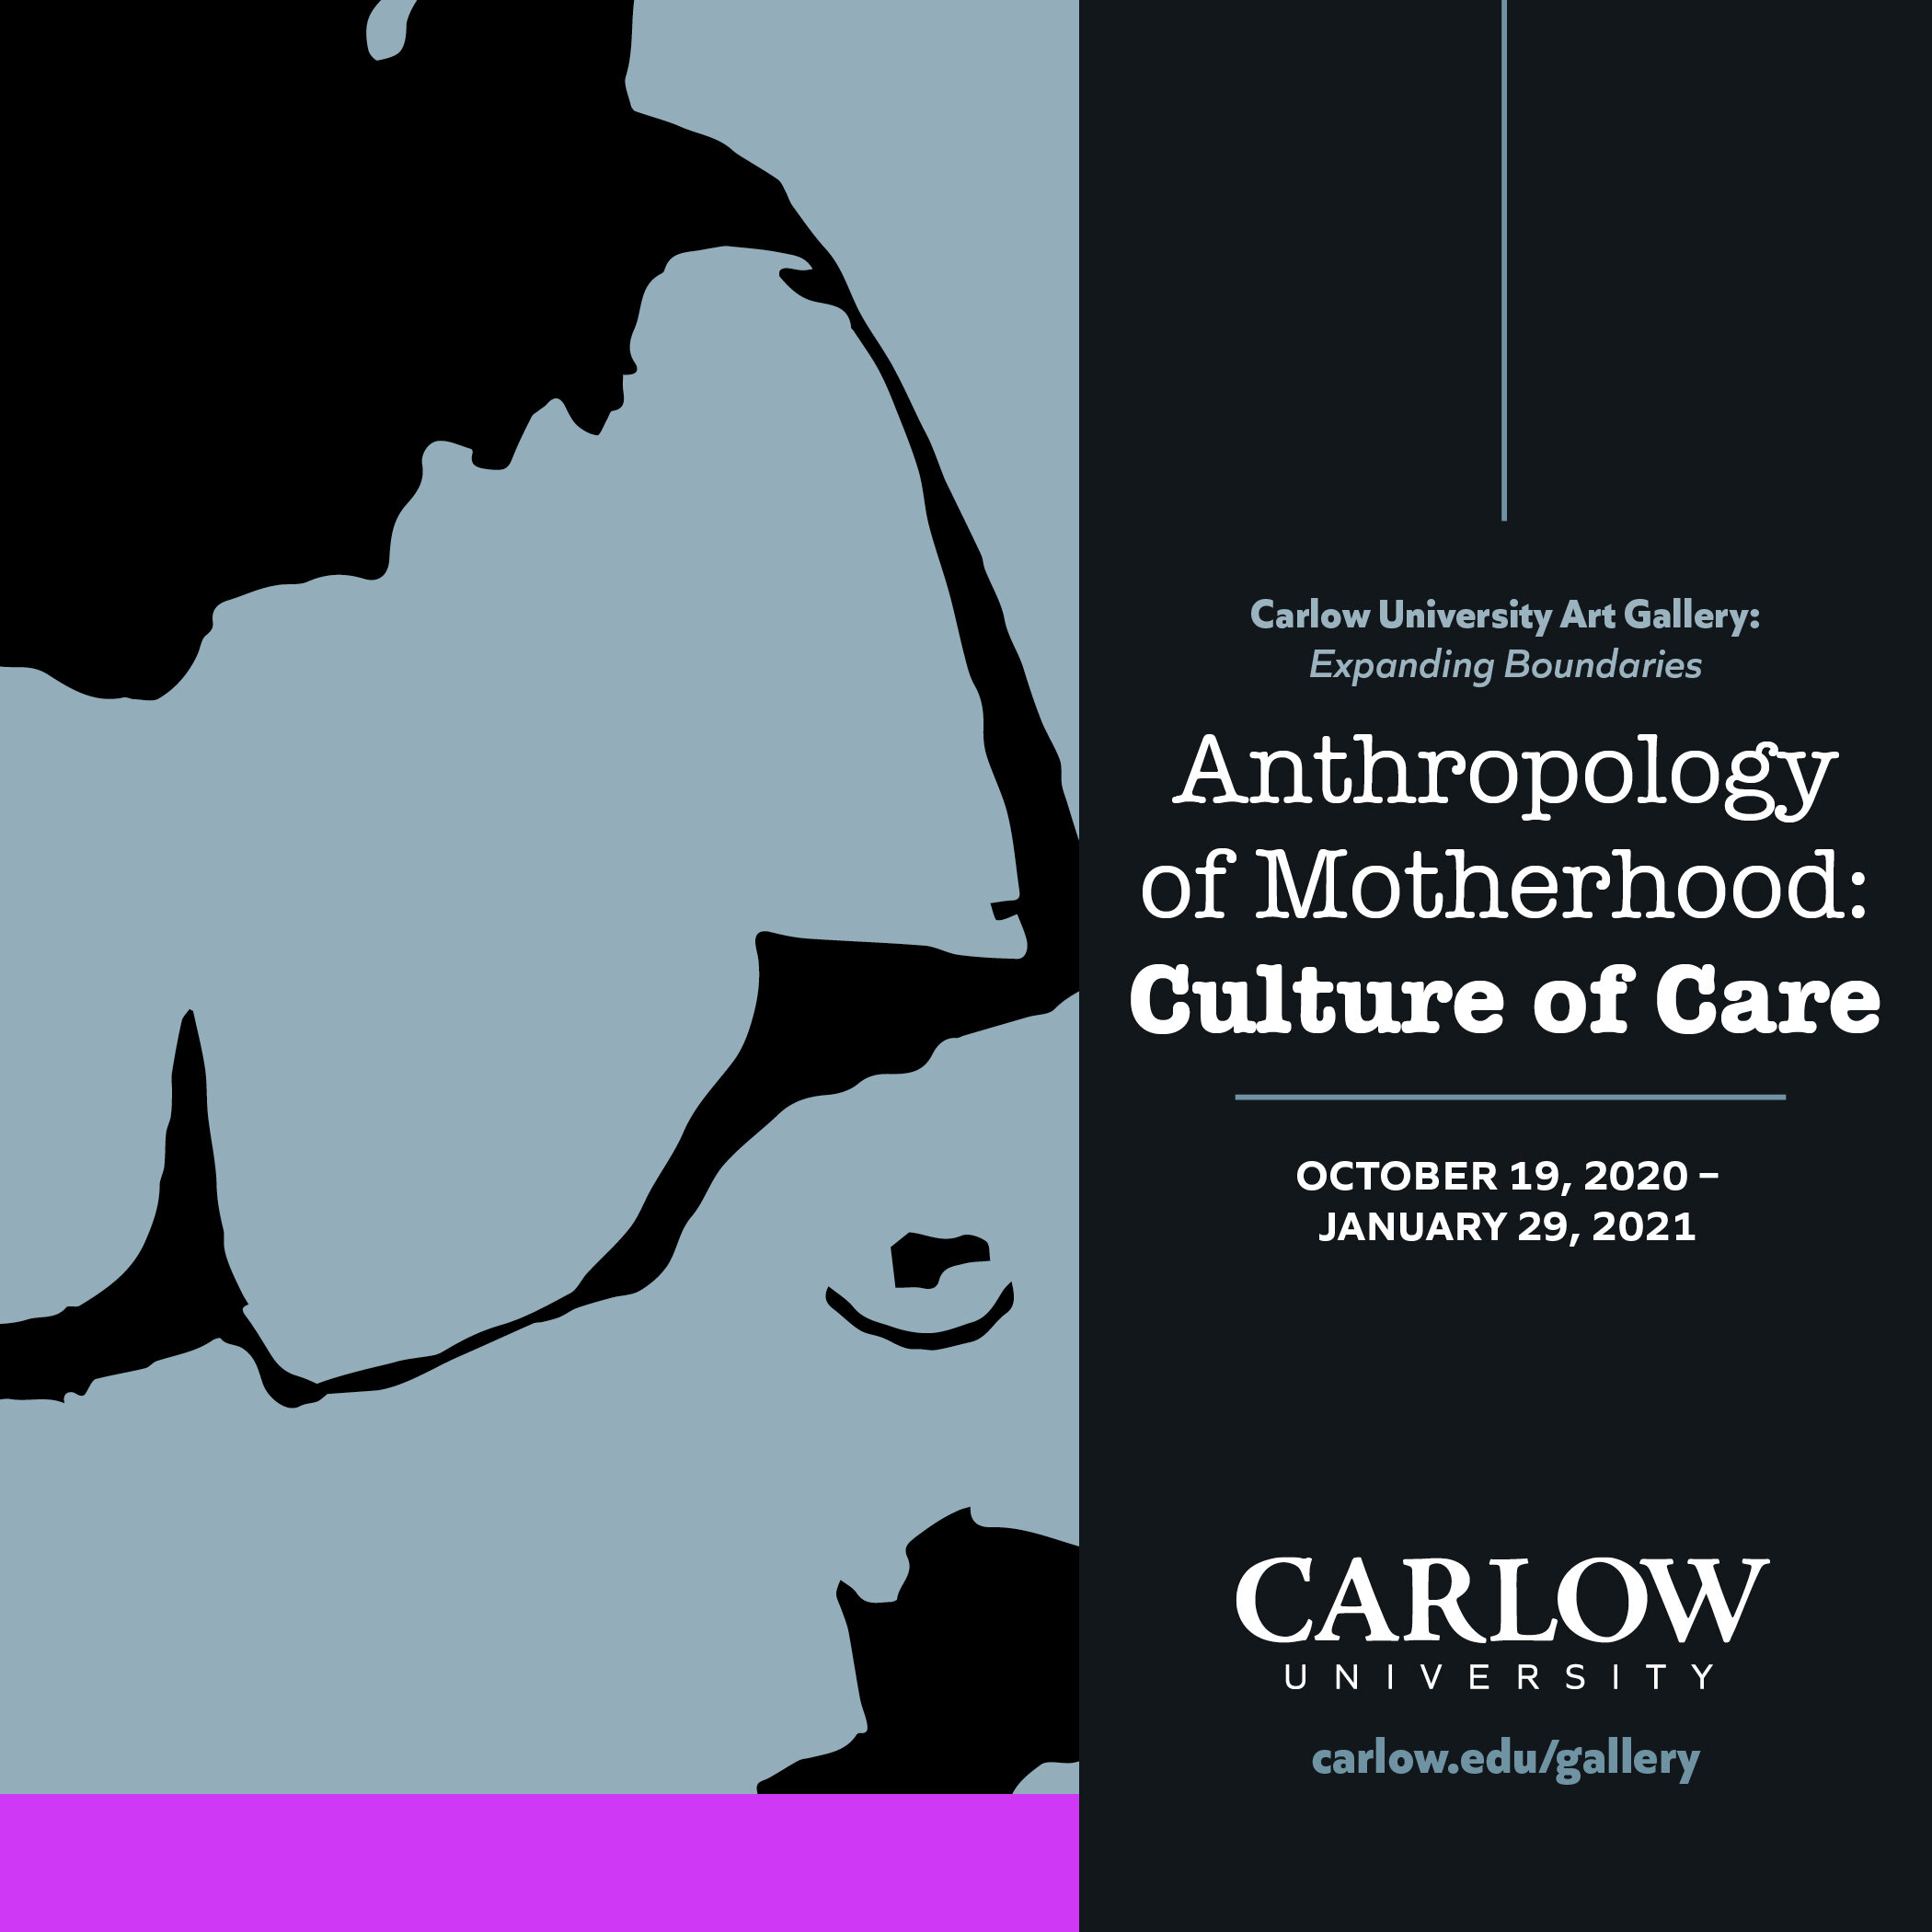 Anthropology of Motherhood: Culture of Care